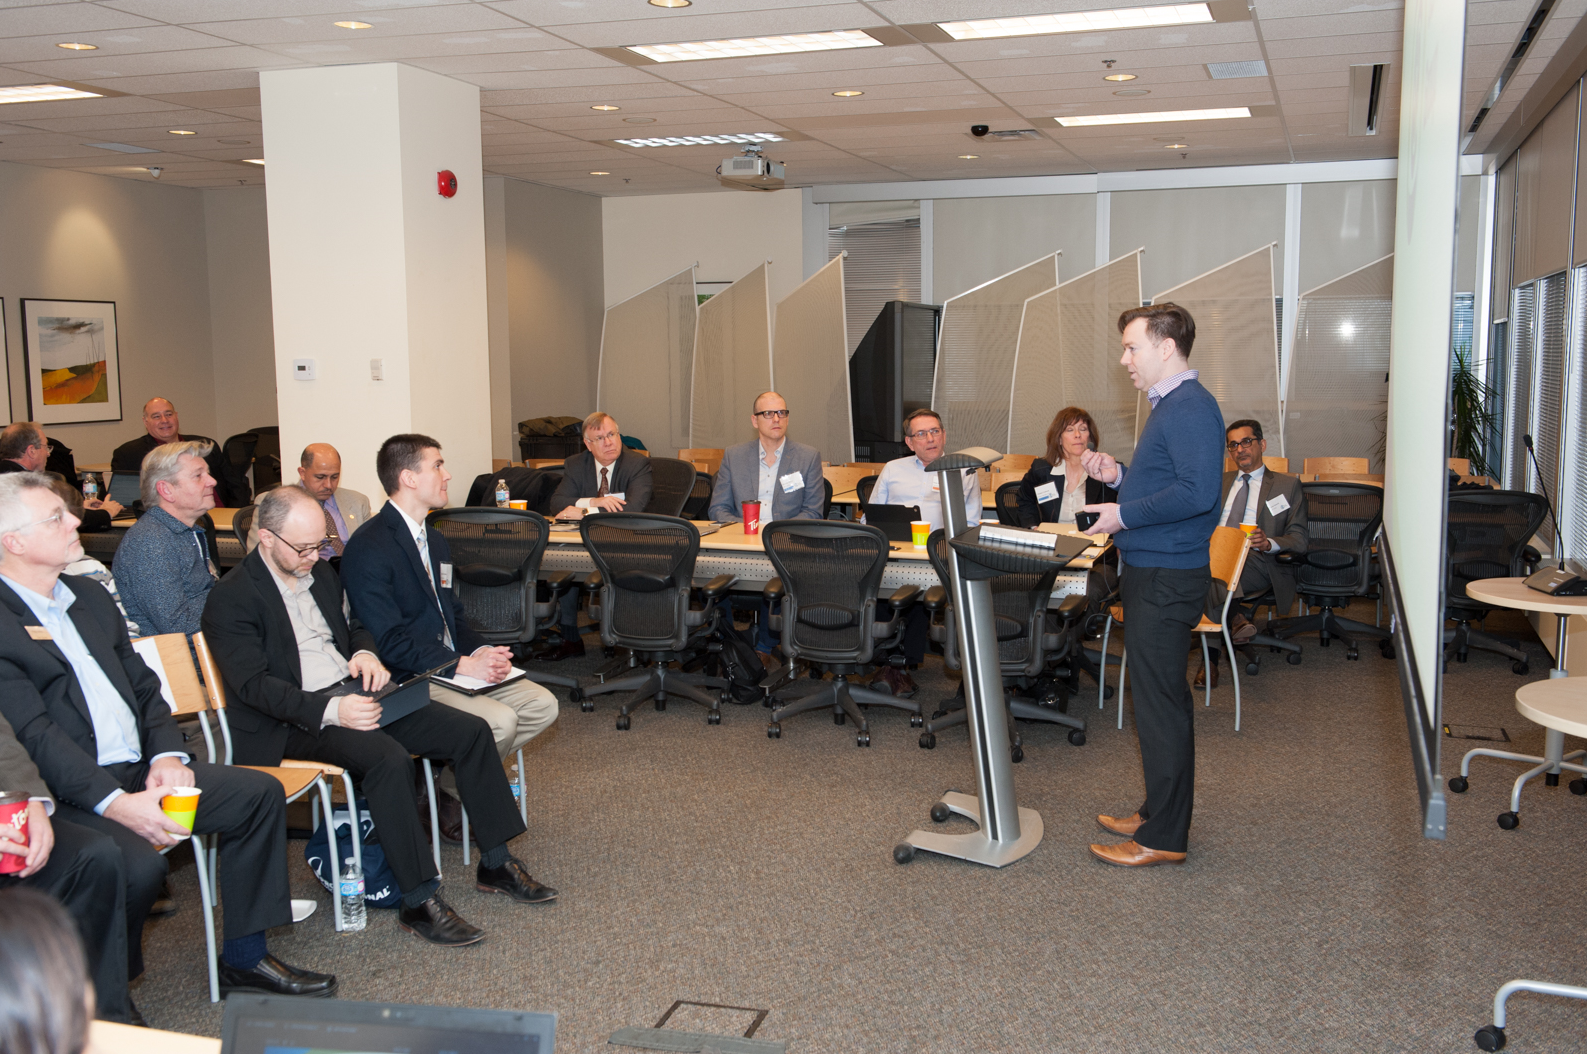 Taken on January 28, 2016 at CSA Group Headquarters where the Electric Vehicle Supply Equipment (EVSE) Infrastructure Requirements in the National Building Code of Canada (NBCC) and the Canadian Electrical Code (CE Code) workshop was held. The objective of this workshop was detail existing Code and Regulatory barriers impeding the deployment of EVSE technology in Canada and, provide recommendations to overcoming the identified barriers.